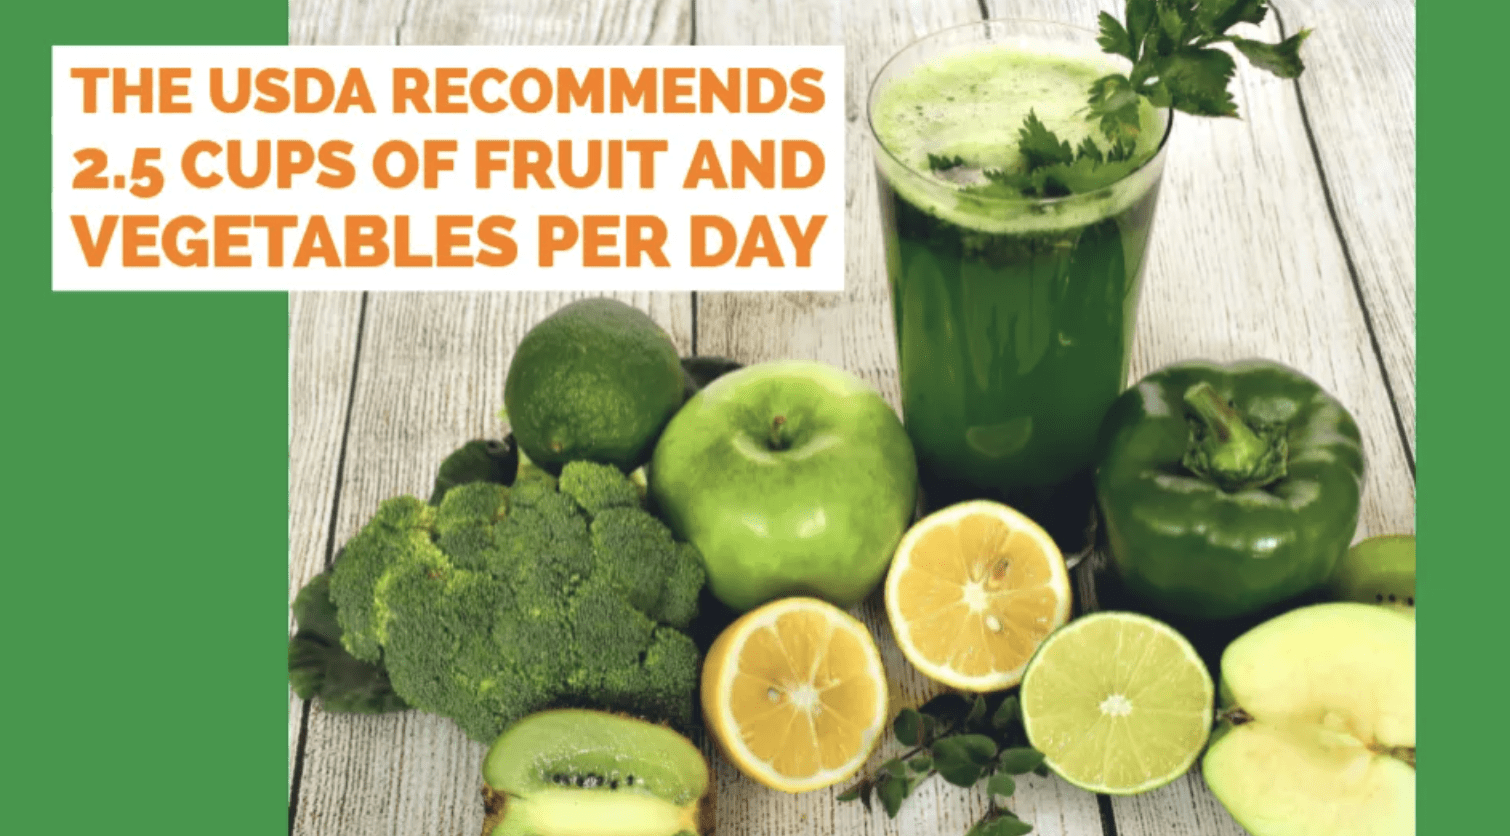 Commercial Fruit Juicers: Everything You Need to Know